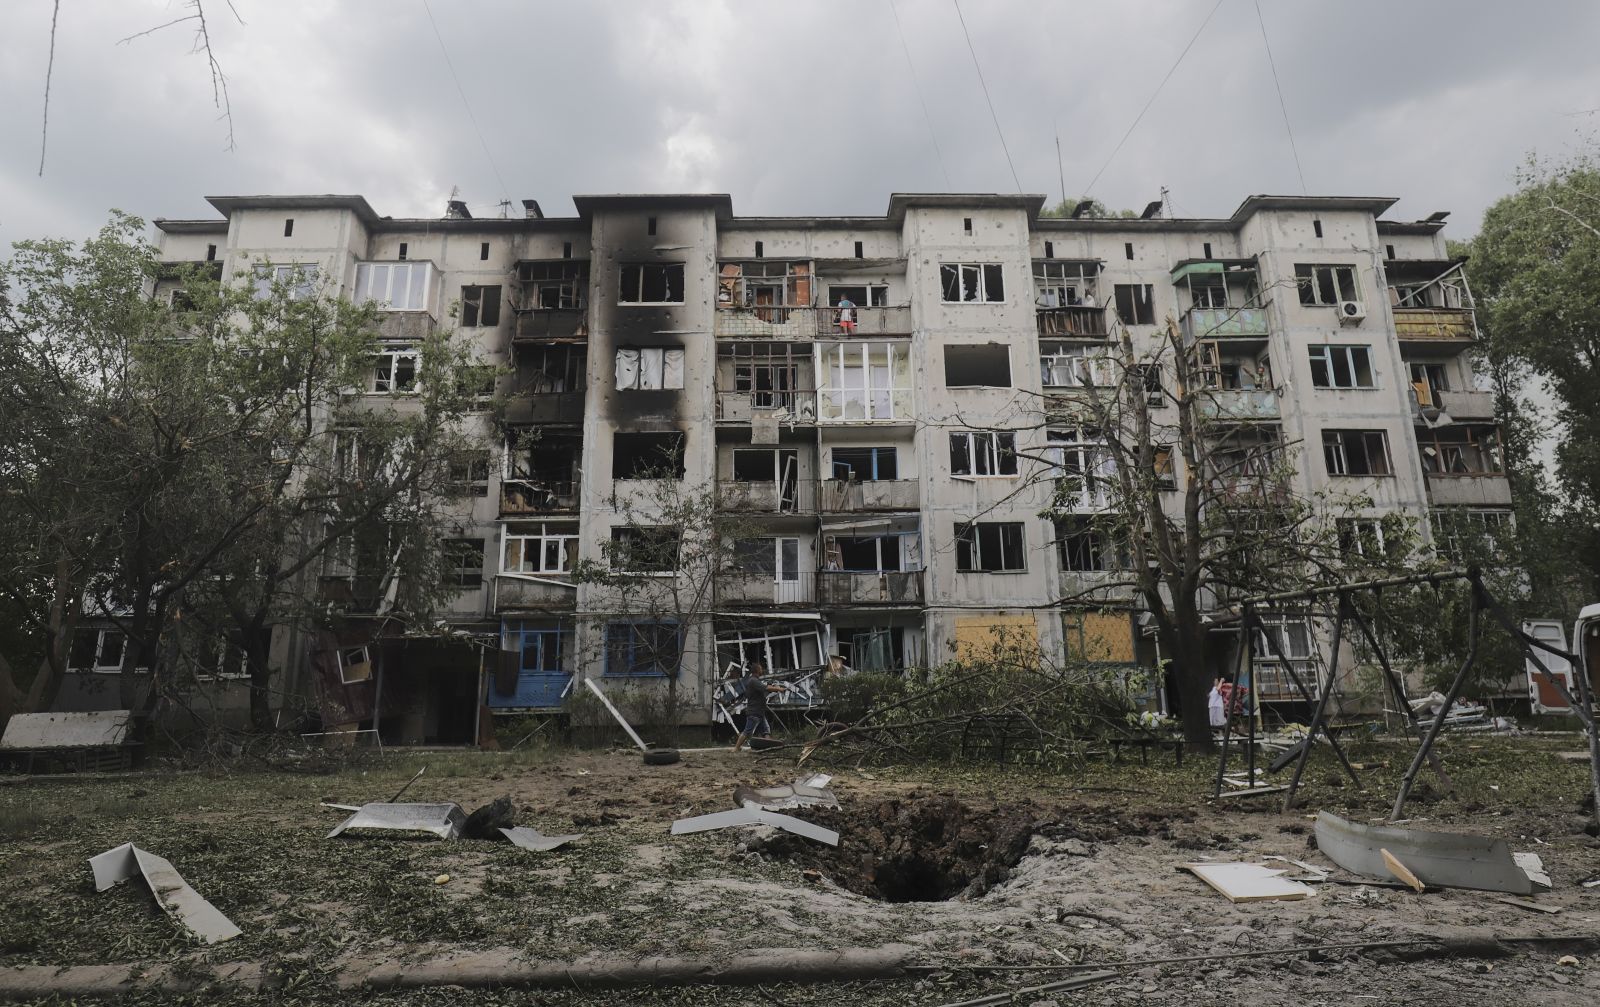 epa10011221 A residential building damaged in recent shelling in the city of Bakhmut, Donetsk region, eastern Ukraine, 13 June 2022, amid the Russian invasion. Russian troops on 24 February entered Ukrainian territory, starting a conflict that has provoked destruction and a humanitarian crisis.  EPA/STRINGER